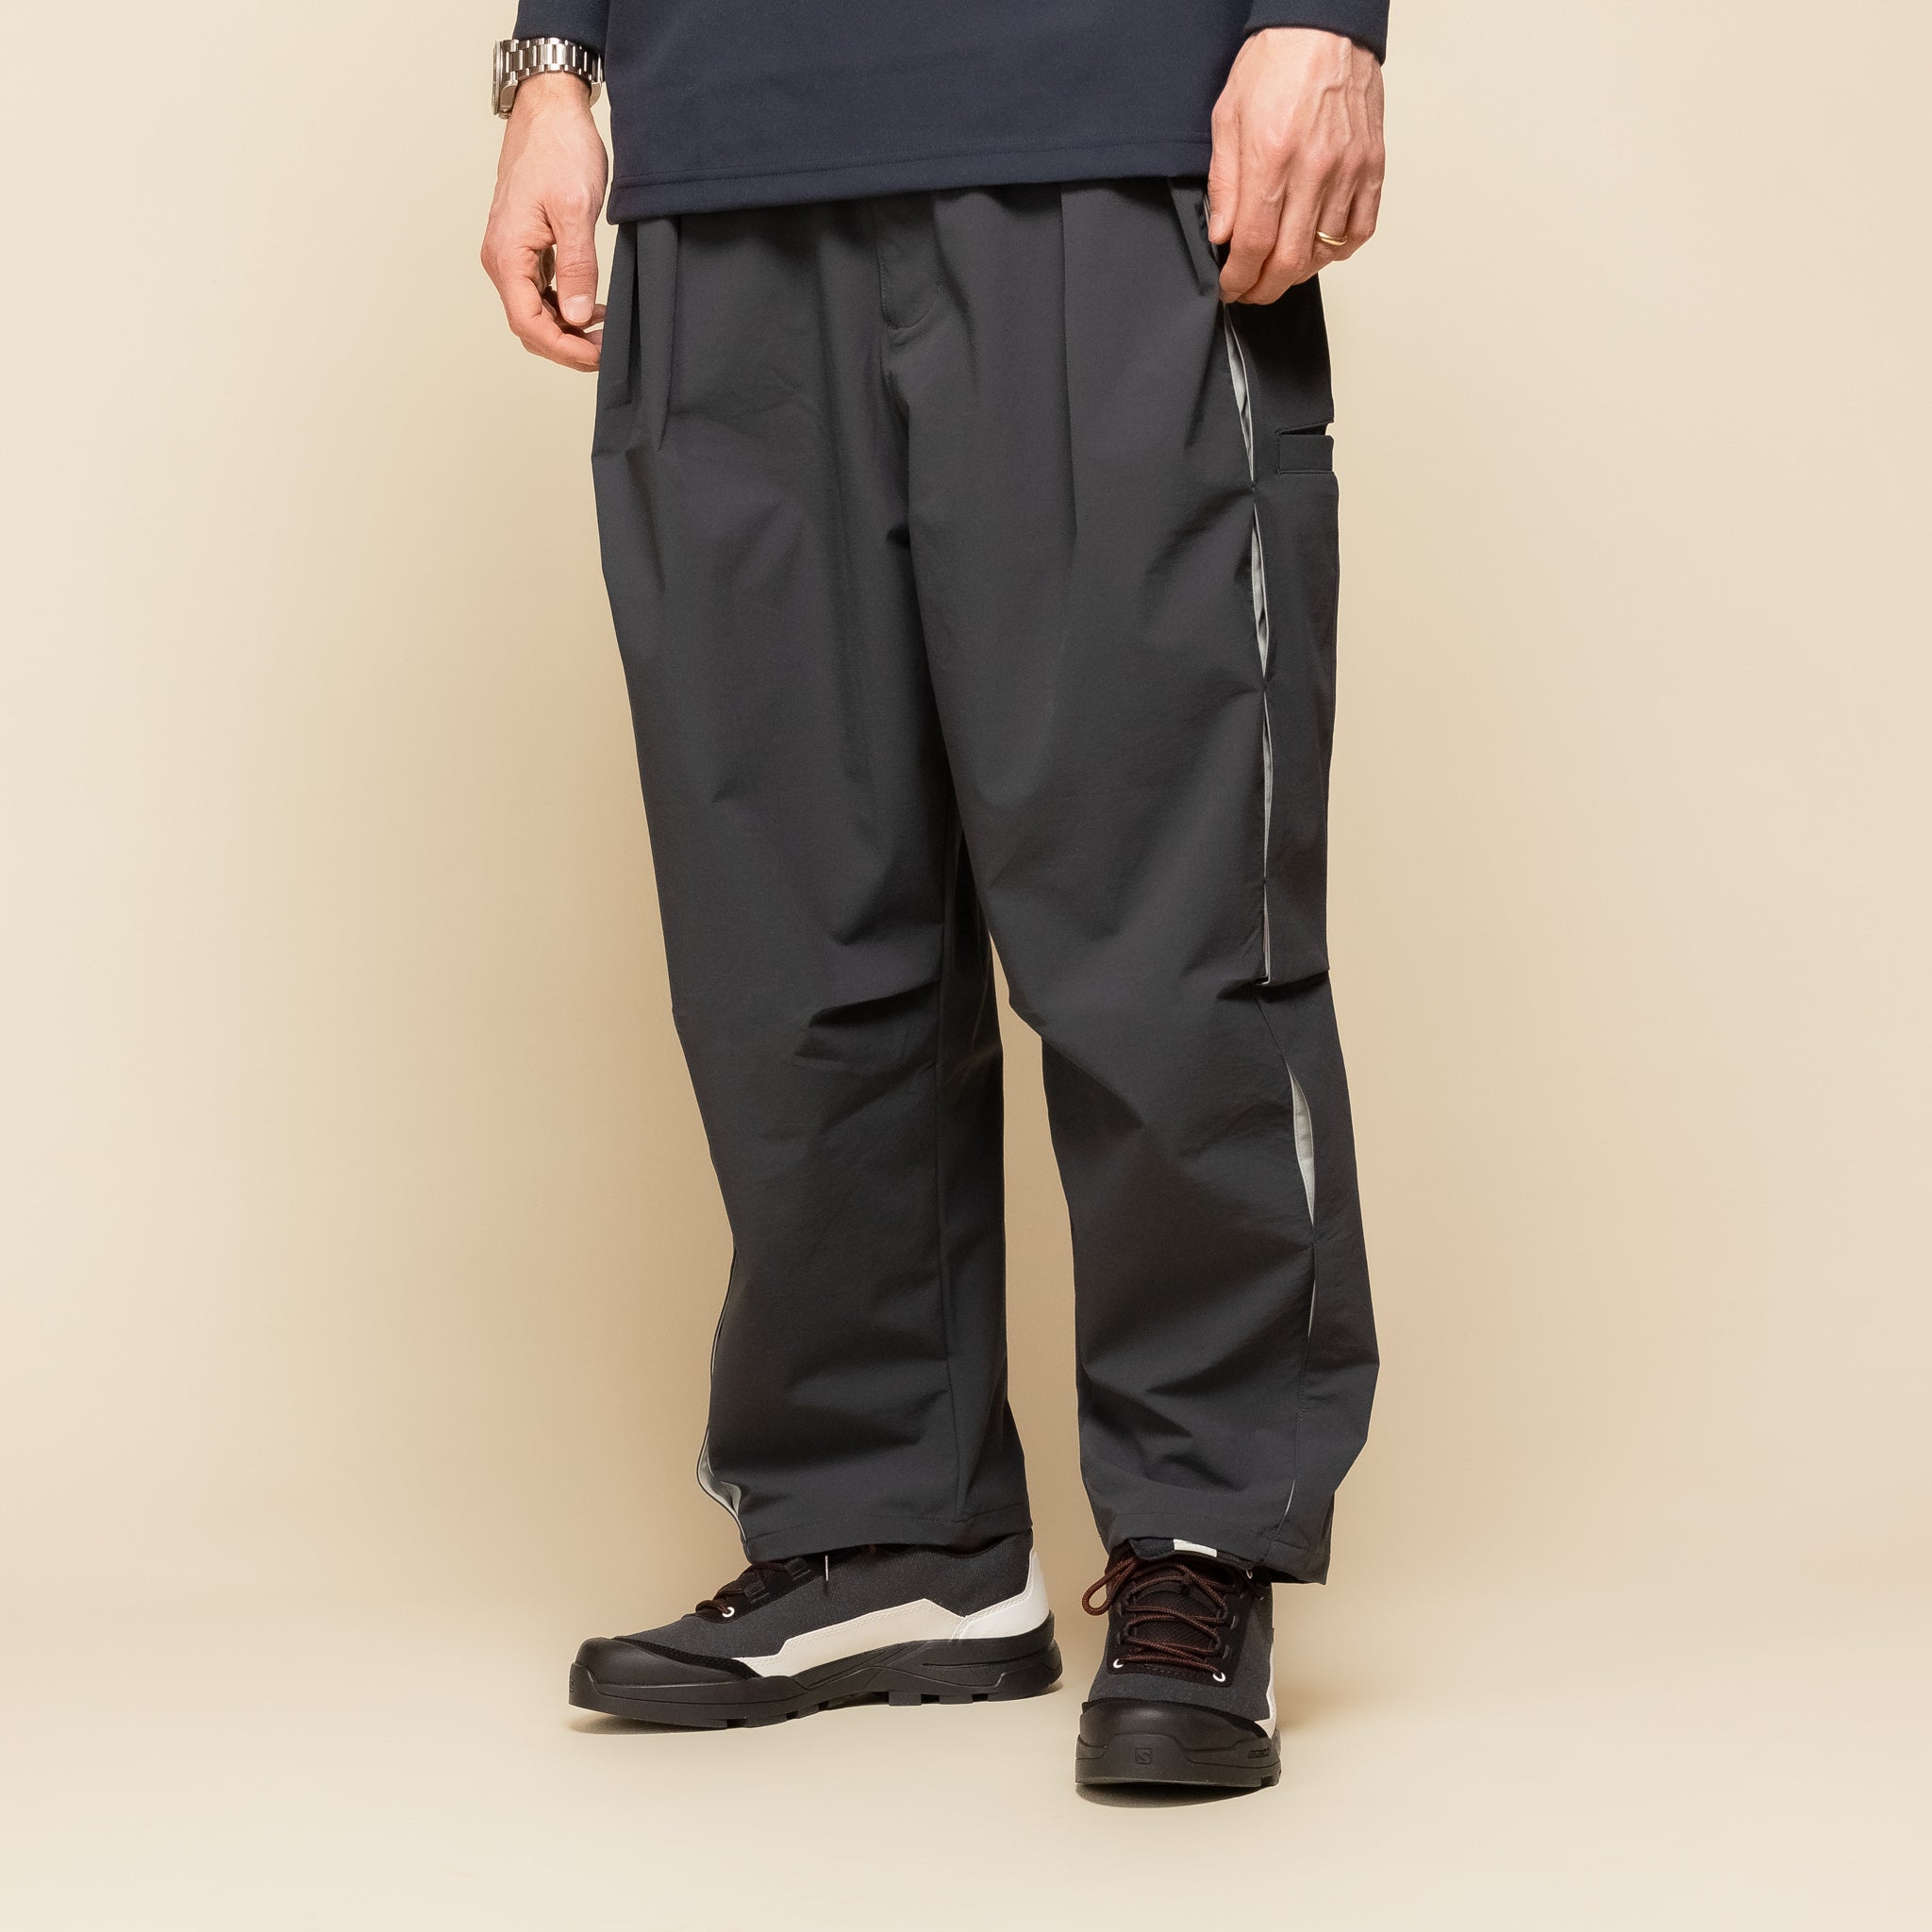 GOOPiMADE x Masterpiece - “MEquip-P1” Double Layers Utility Trousers - Marine